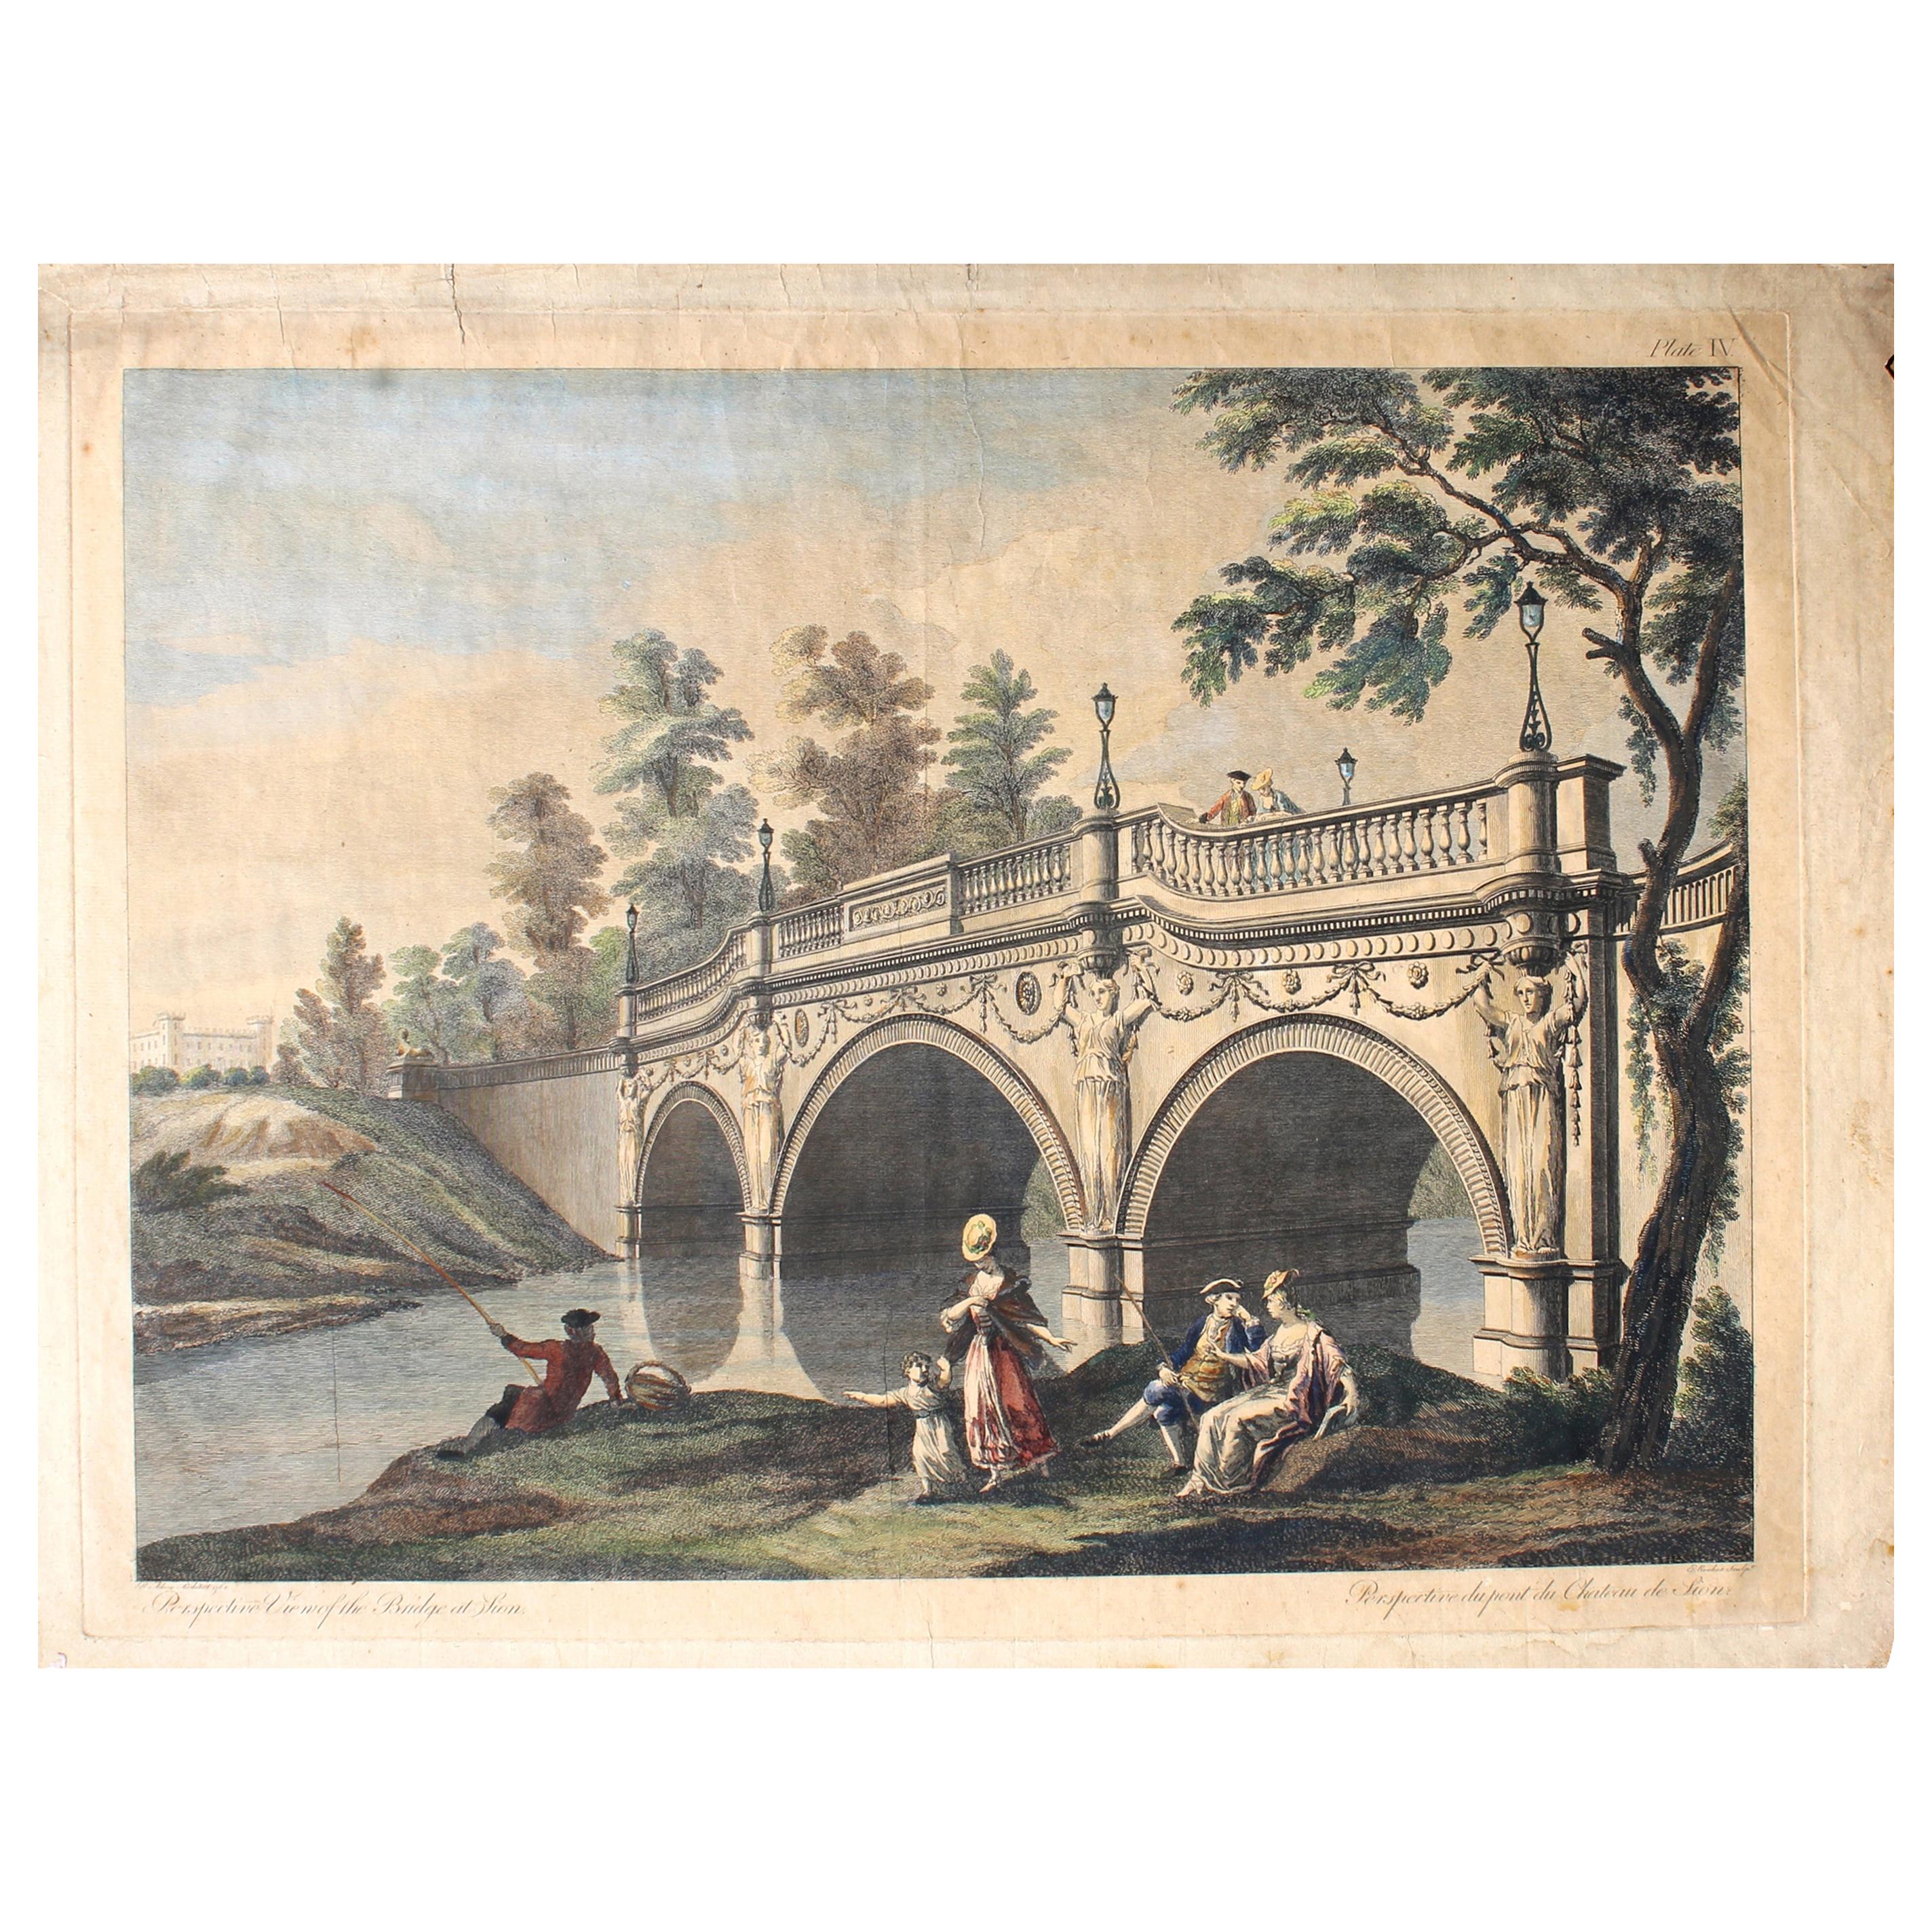 Robert Adam Architect 1768 "Perspective View of The Bridge at Lion" Rare Etching